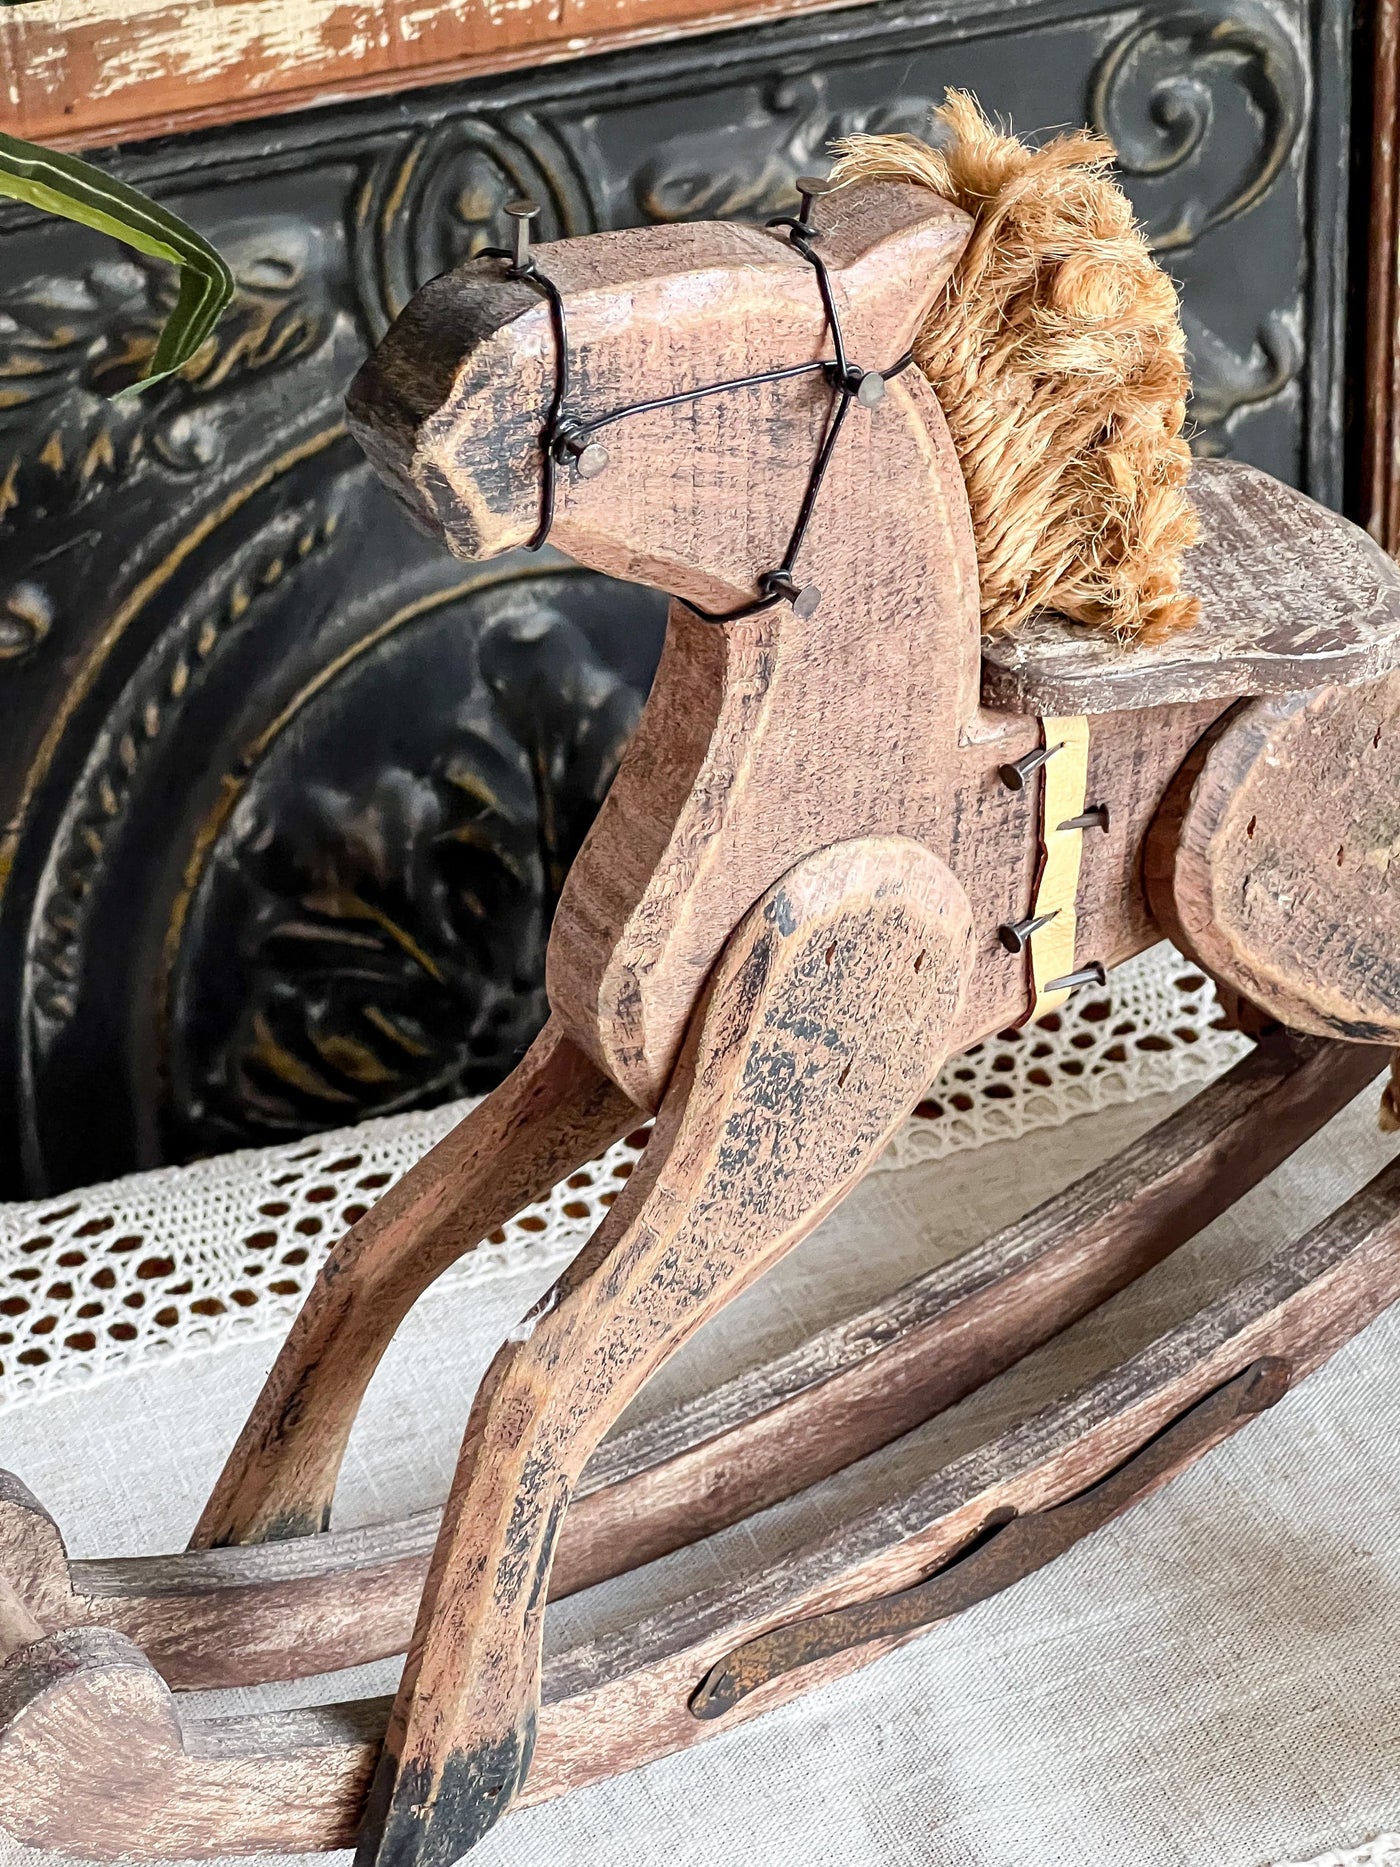 Vintage Inspired Wooden Rocking Horse Revive In Style Vintage Furniture Painted Refinished Redesign Beautiful One of a Kind Artistic Antique Unique Home Decor Interior Design French Country Shabby Chic Cottage Farmhouse Grandmillenial Coastal Chalk Paint Metallic Glam Eclectic Quality Dovetailed Rustic Furniture Painter Pinterest Bedroom Living Room Entryway Kitchen Home Trends House Styles Decorating ideas